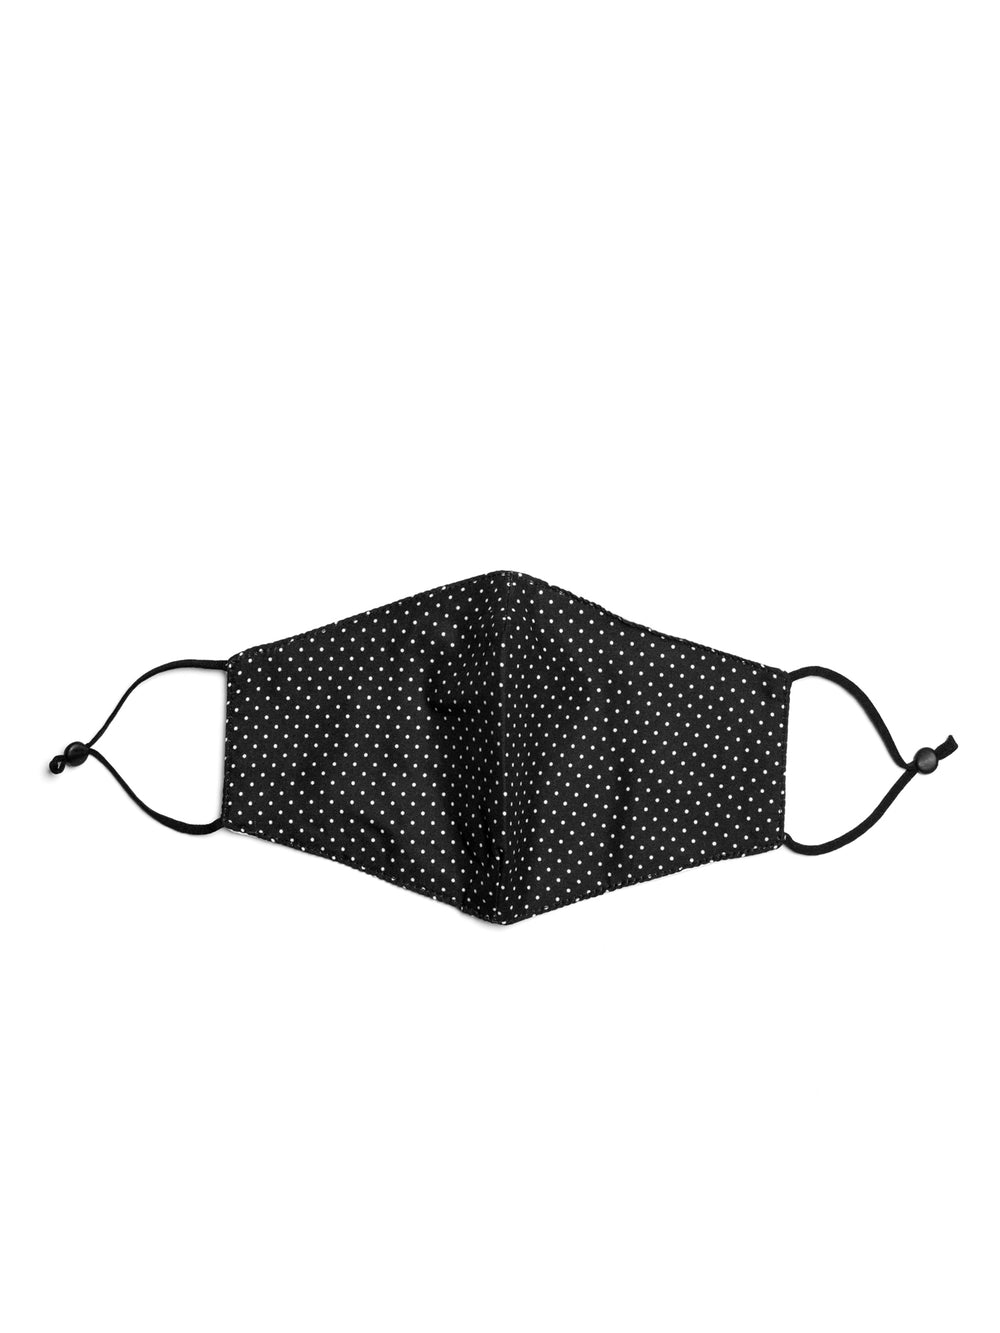 SCOUT & TRAIL FACE MASK - POLKA DOTS - CLEARANCE